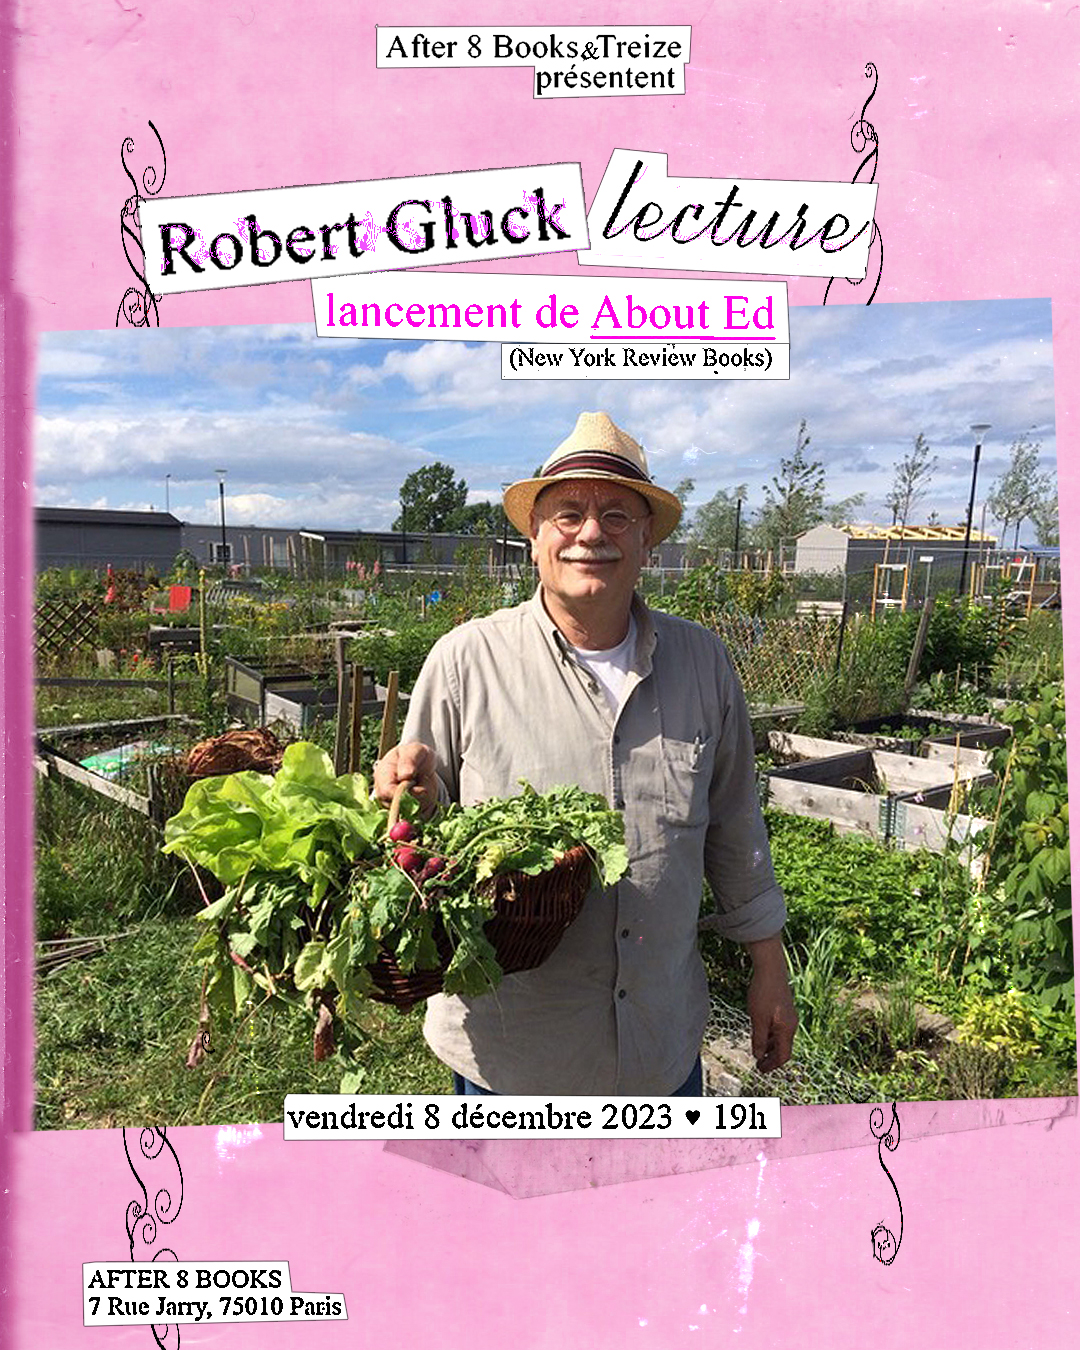  - About Ed, a booklaunch with Robert Glück